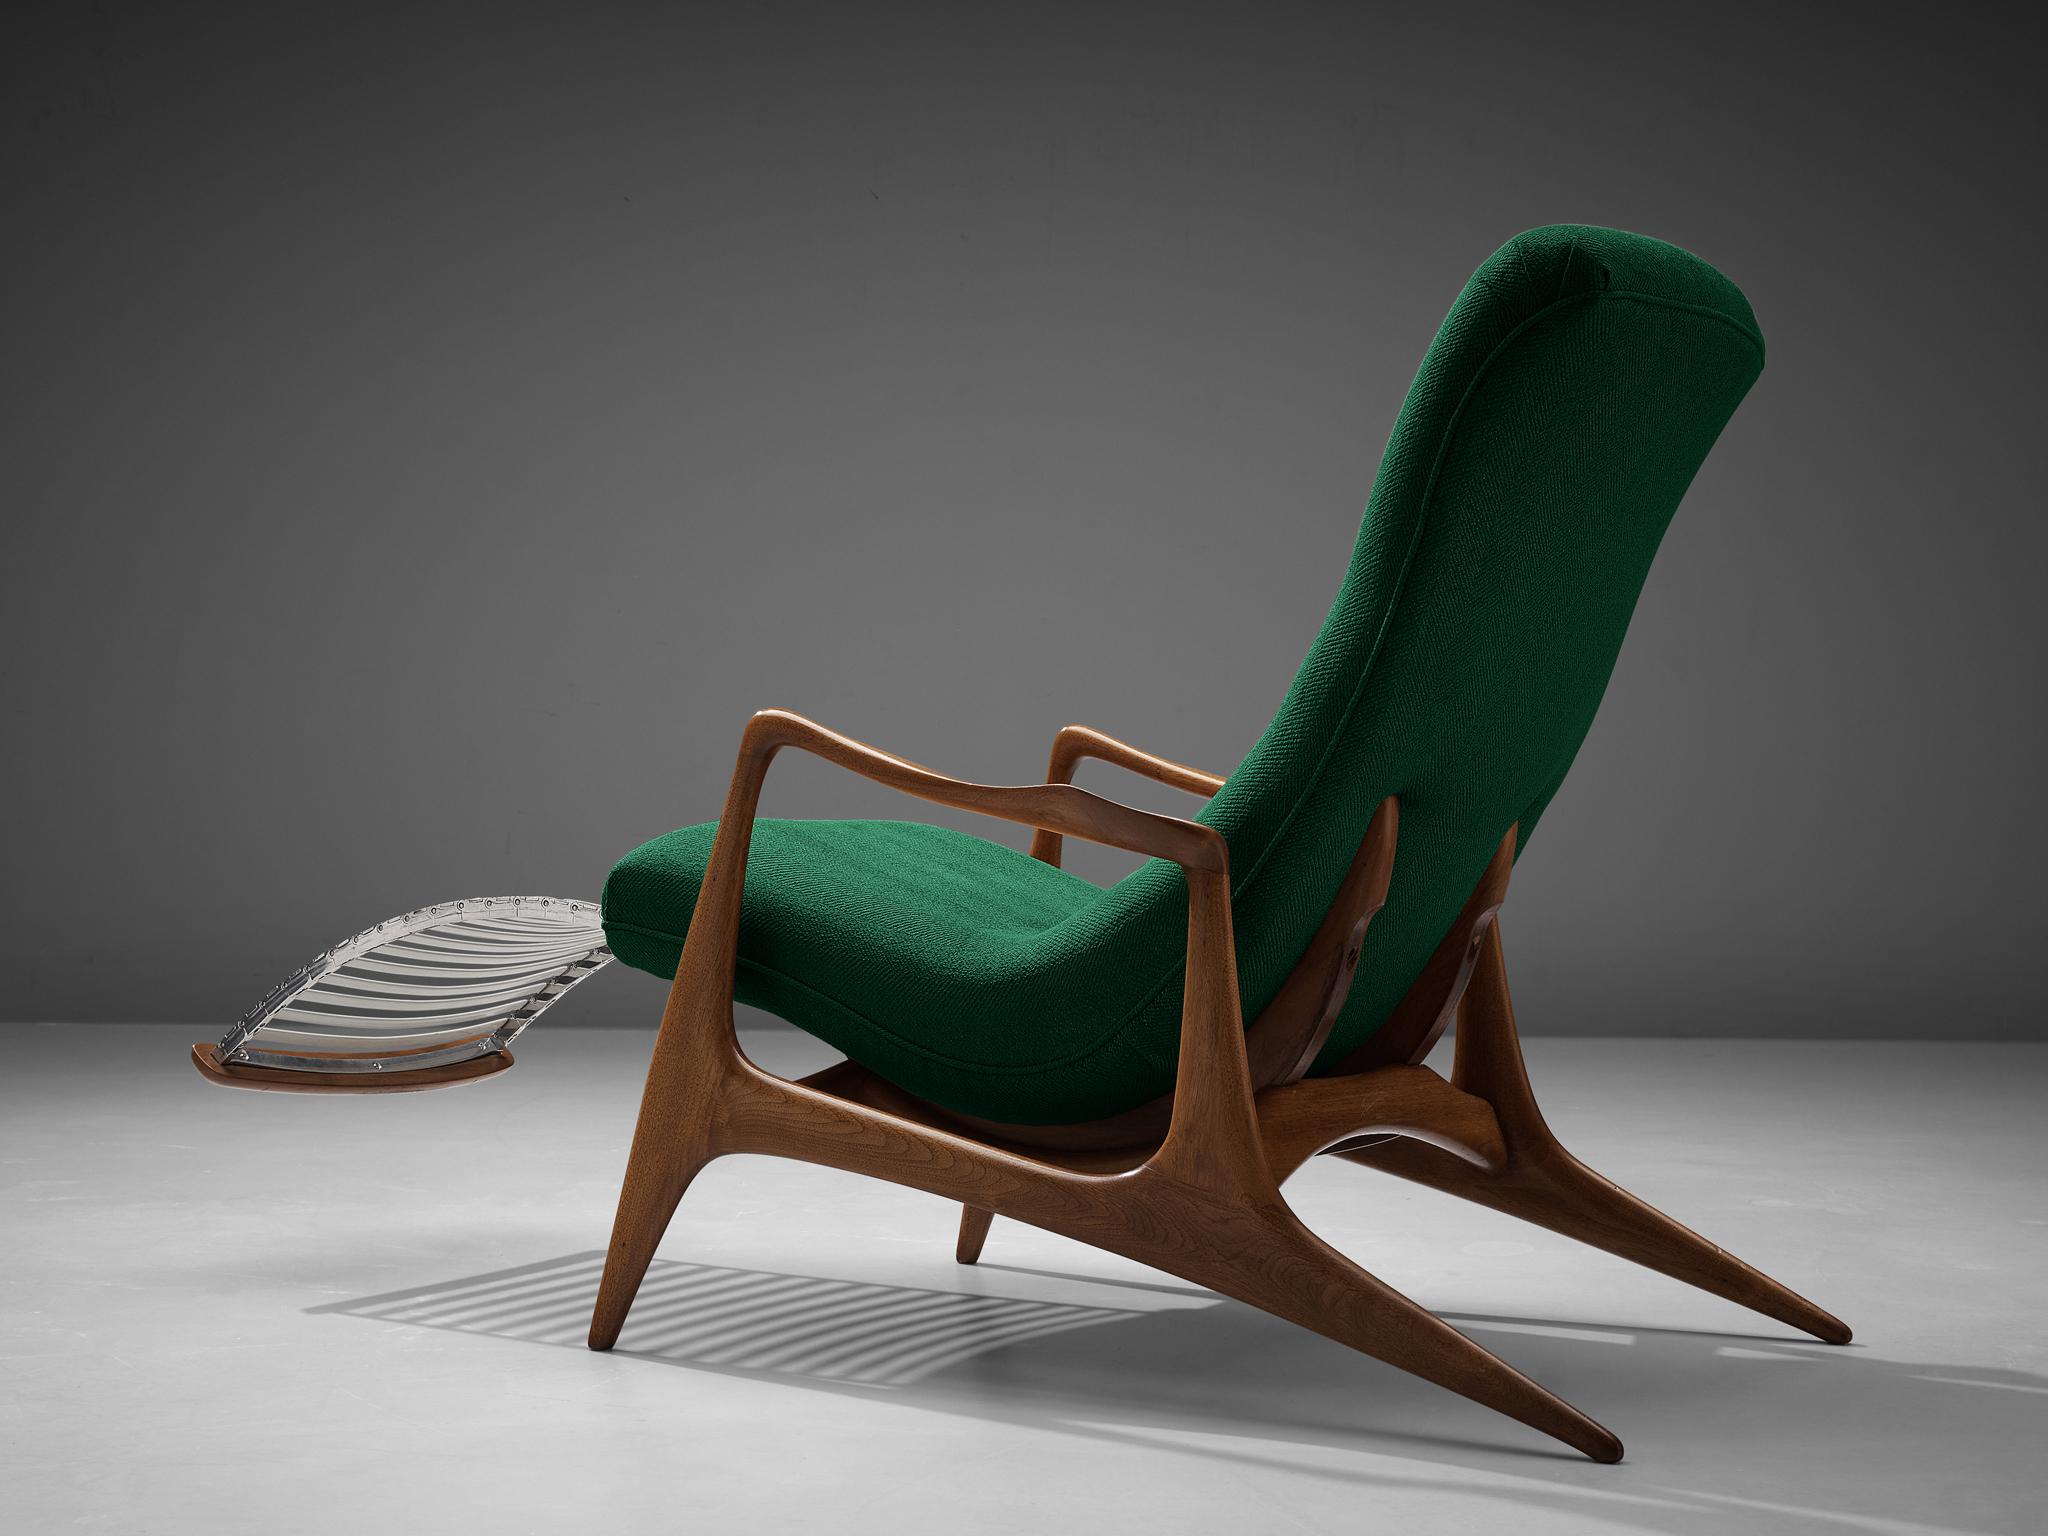 Vladimir Kagan for Dreyfuss, 'Contour' chair model VK 100, teak, green fabric, United States, 1950s
 
This lounge chair by Kagan is sculptural and delicate. The frame is executed in teak, carved and detailed in an exquisite manner. The back legs are